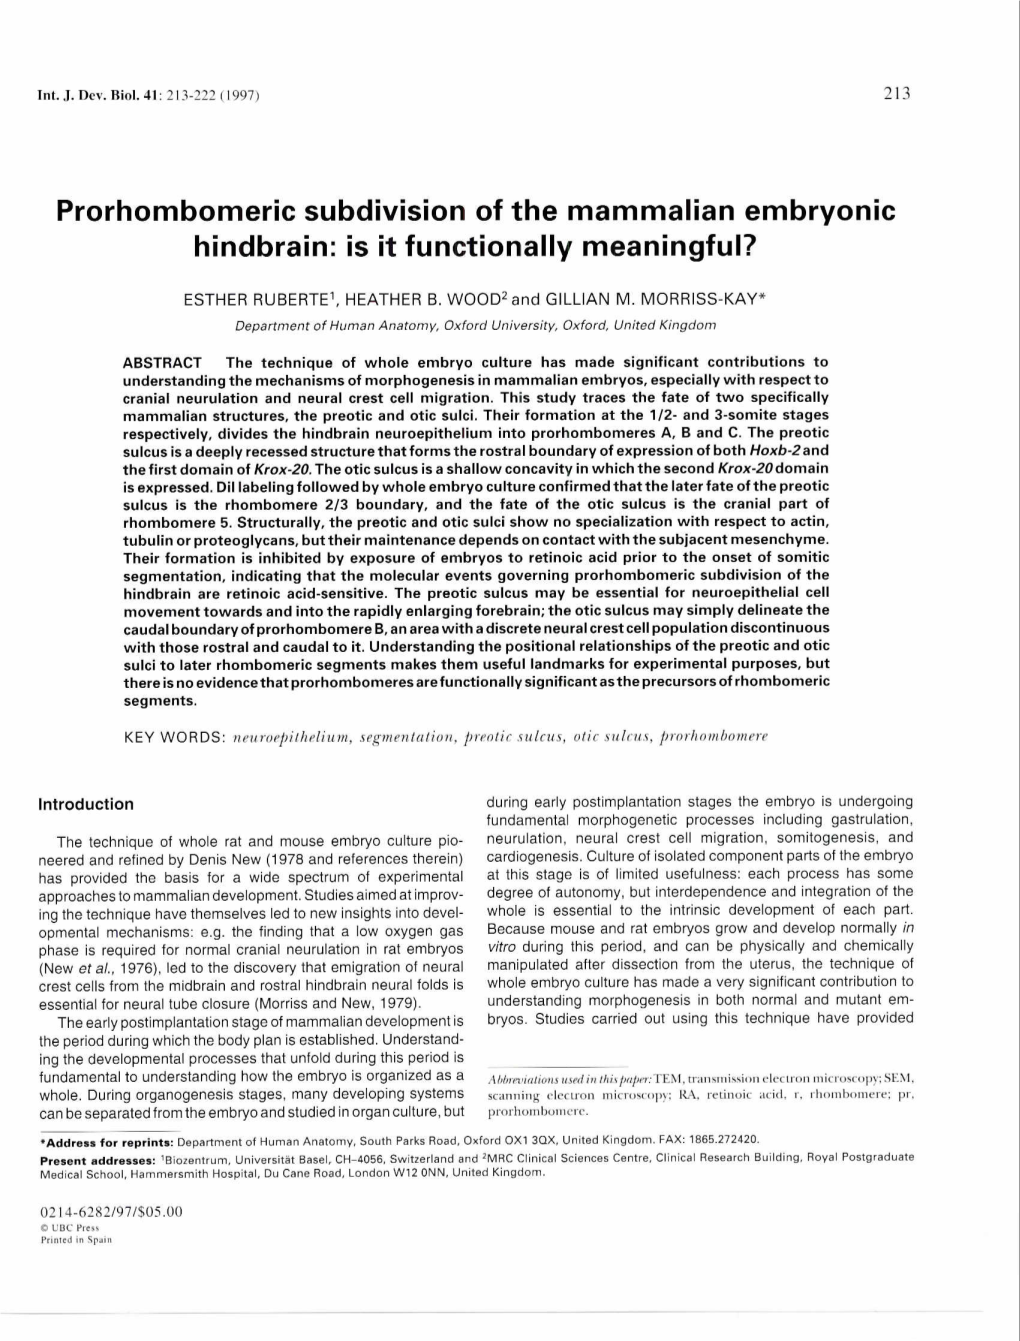 Prorhombomeric Subdivision of the Mammalian Embryonic Hindbrain: Is It Functionally Meaningful?